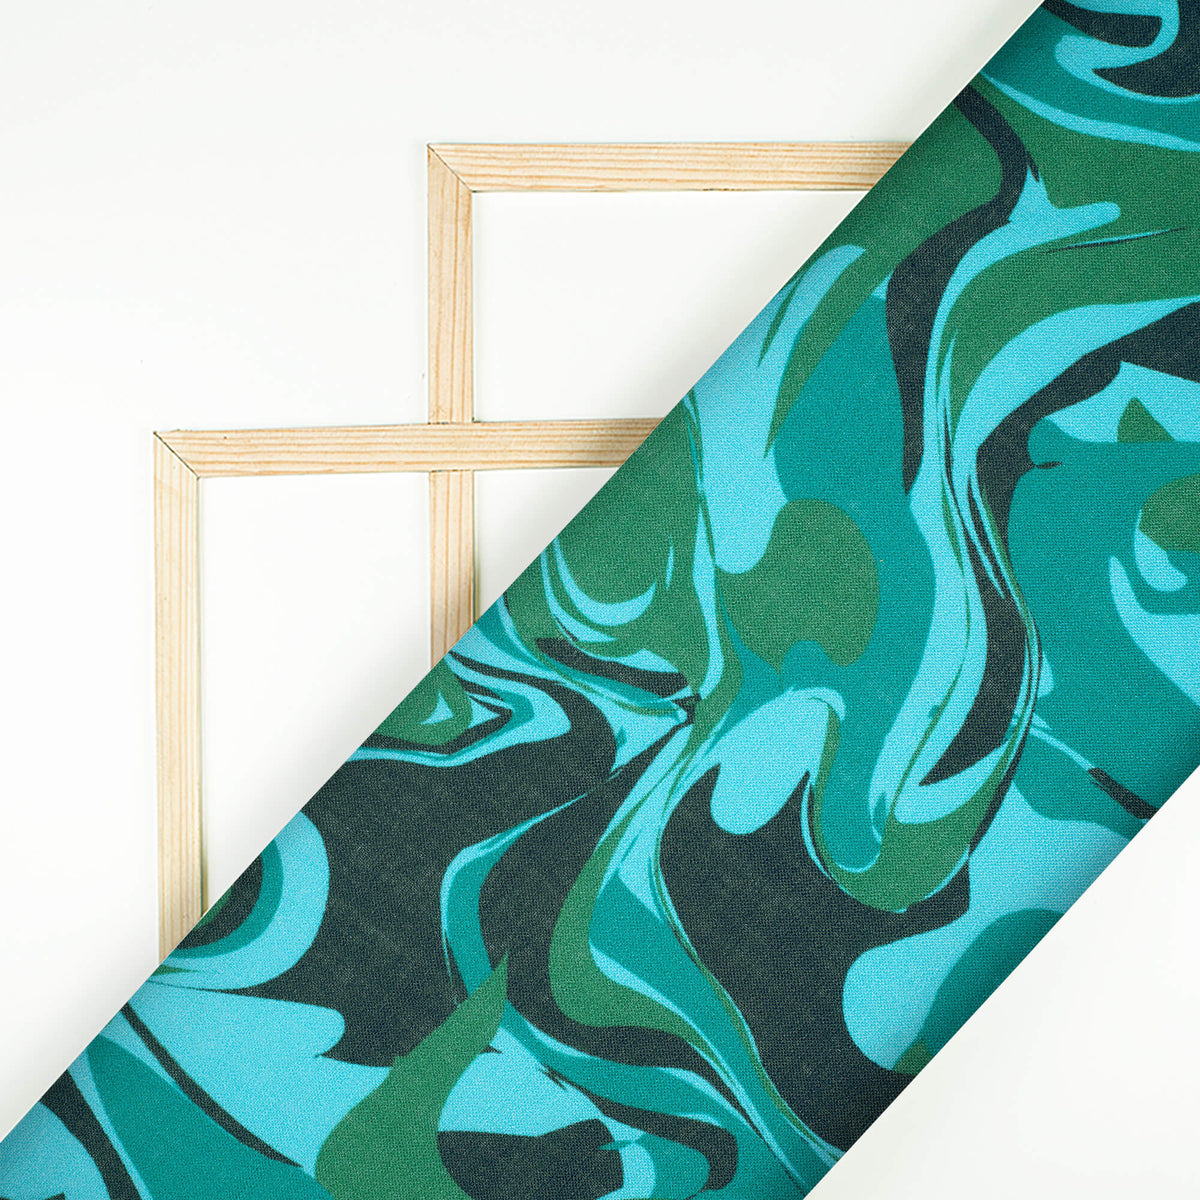 Turquoise And Army Green Camouflage Digital Print Linen Textured Fabric (Width 56 Inches) - Fabcurate